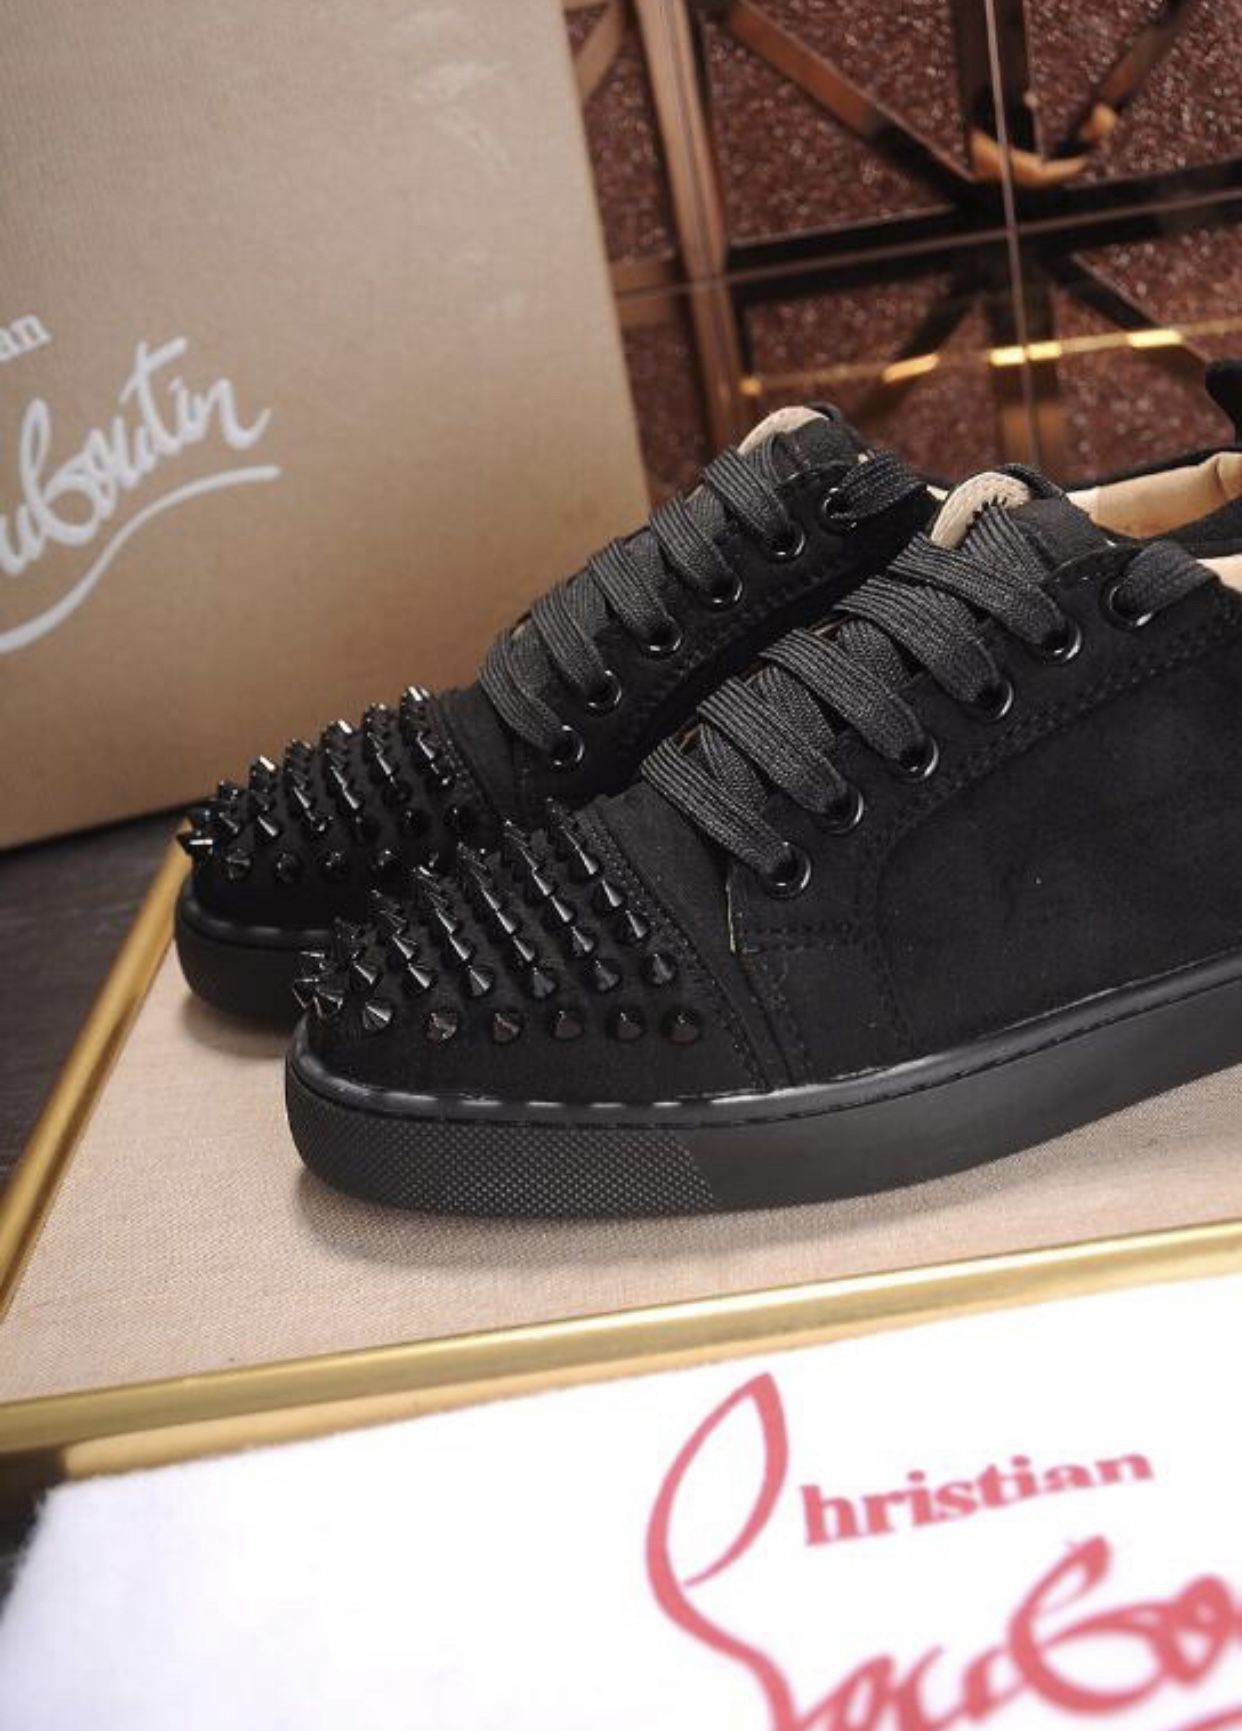 Christian Louboutin for Sale in Compton, CA - OfferUp